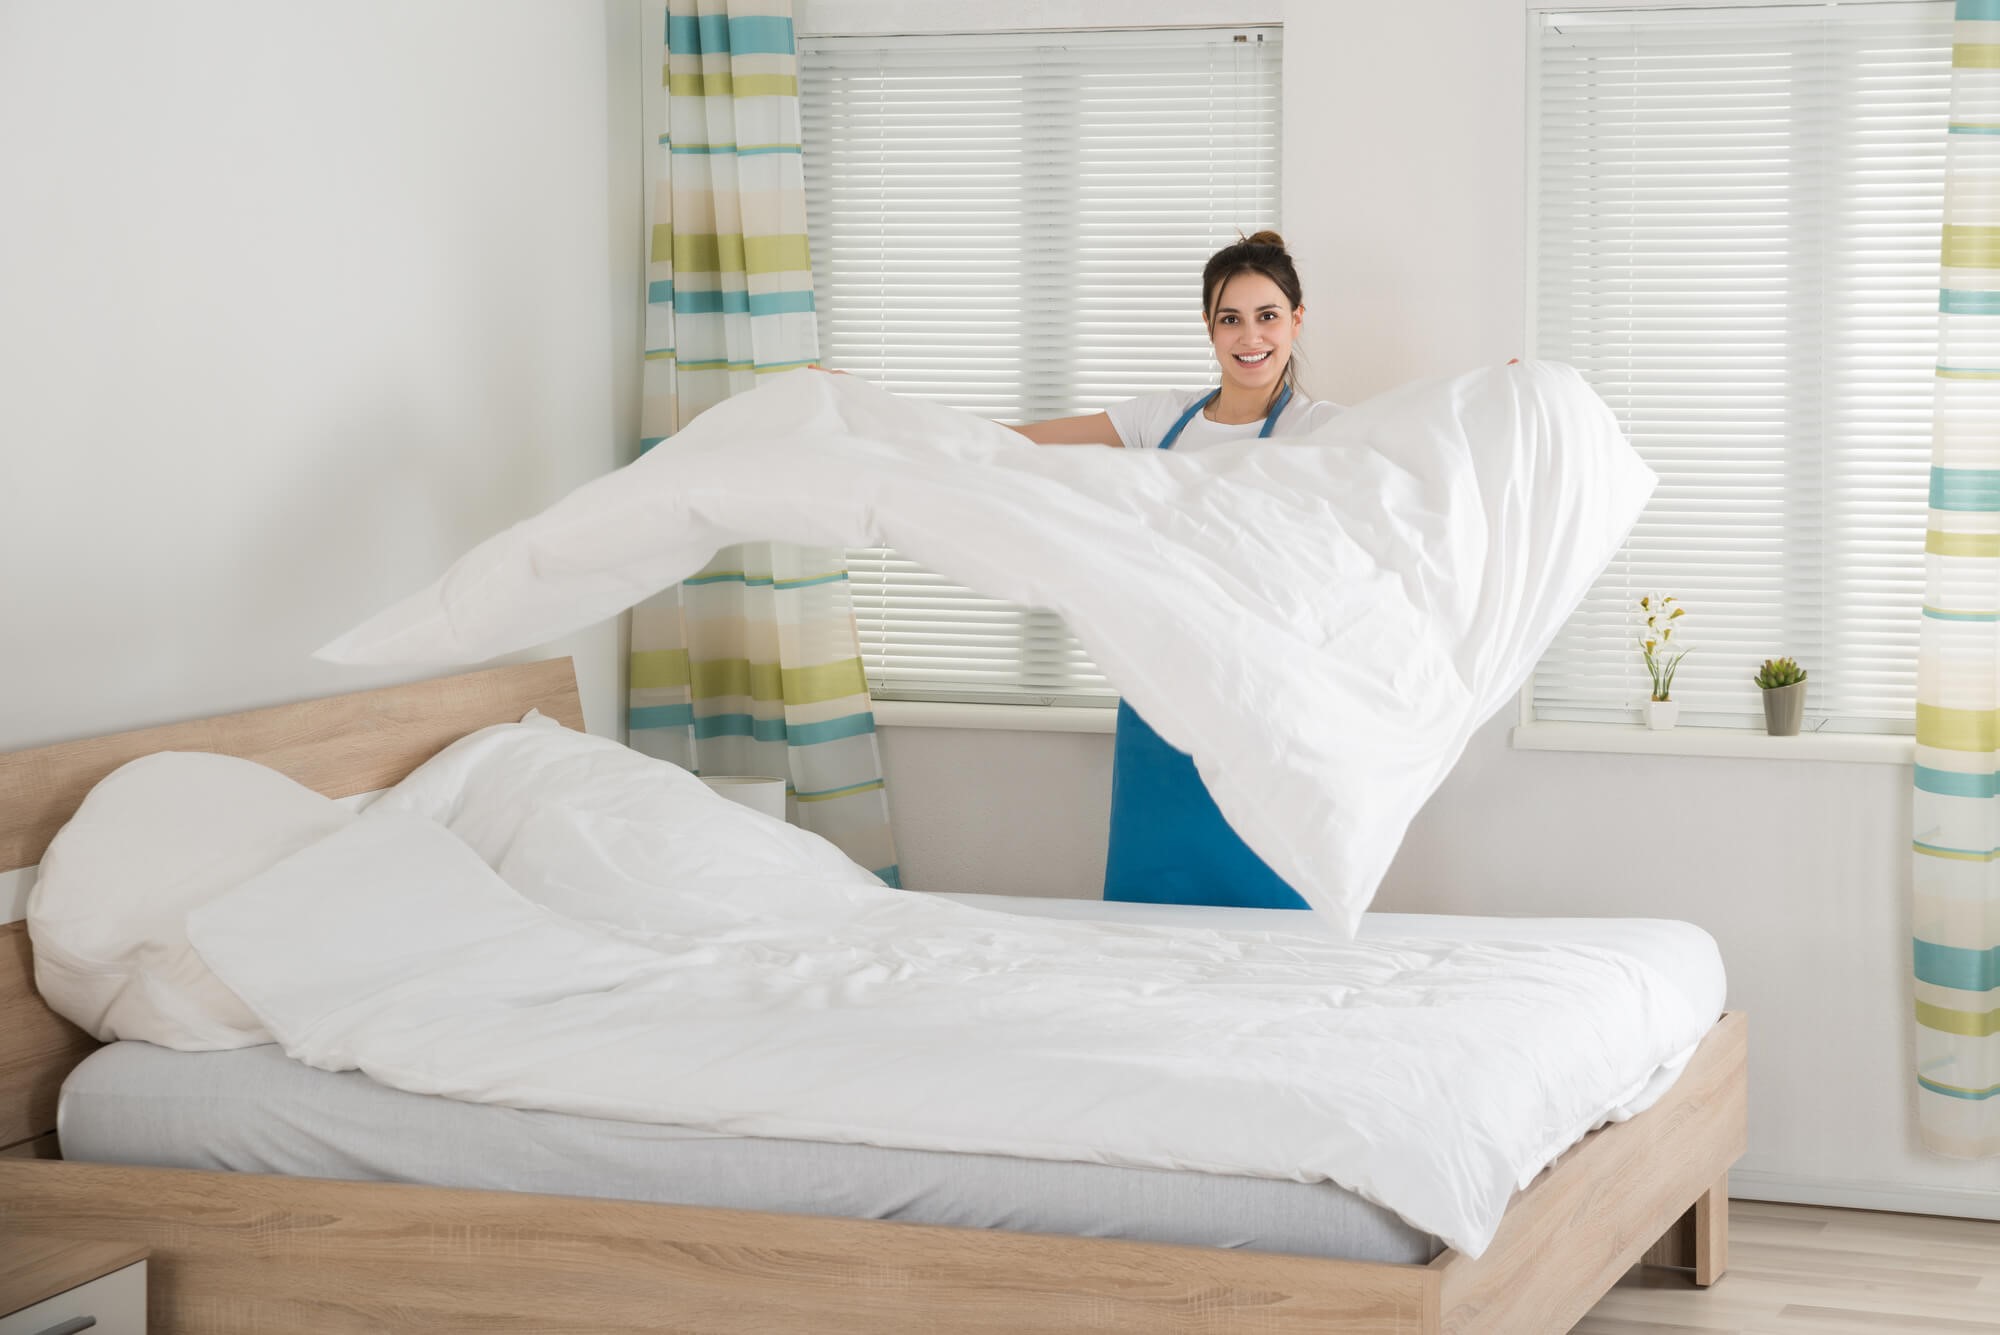 removing a heavy foam mattress from a bed